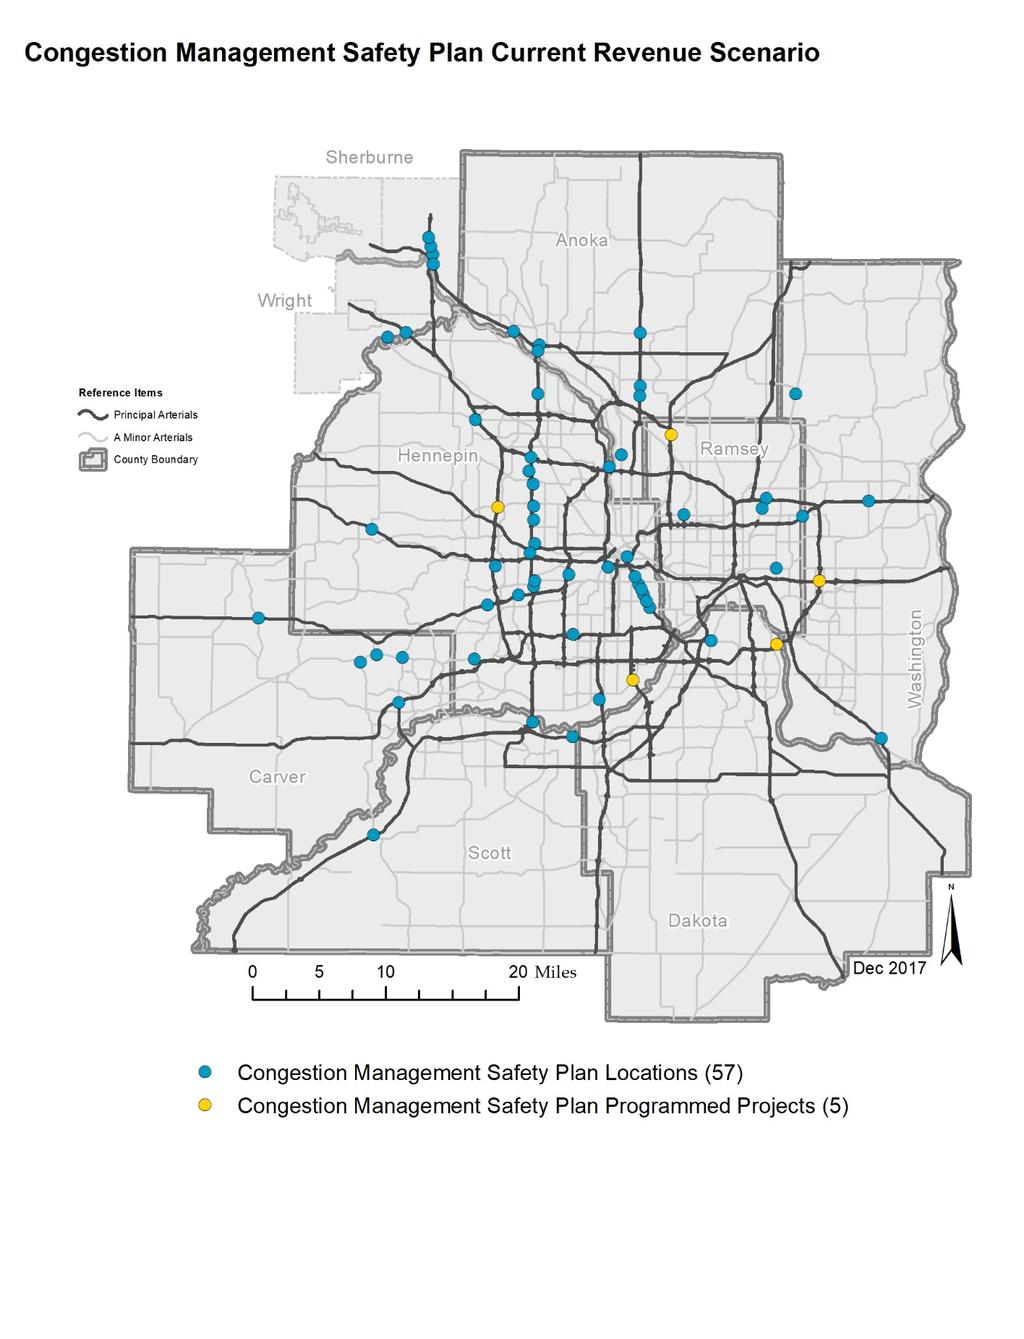 Figure 5-11: Spot Mobility Improvement Opportunity Areas Identified in CMSP IV 4 (MnDOT, 2018)